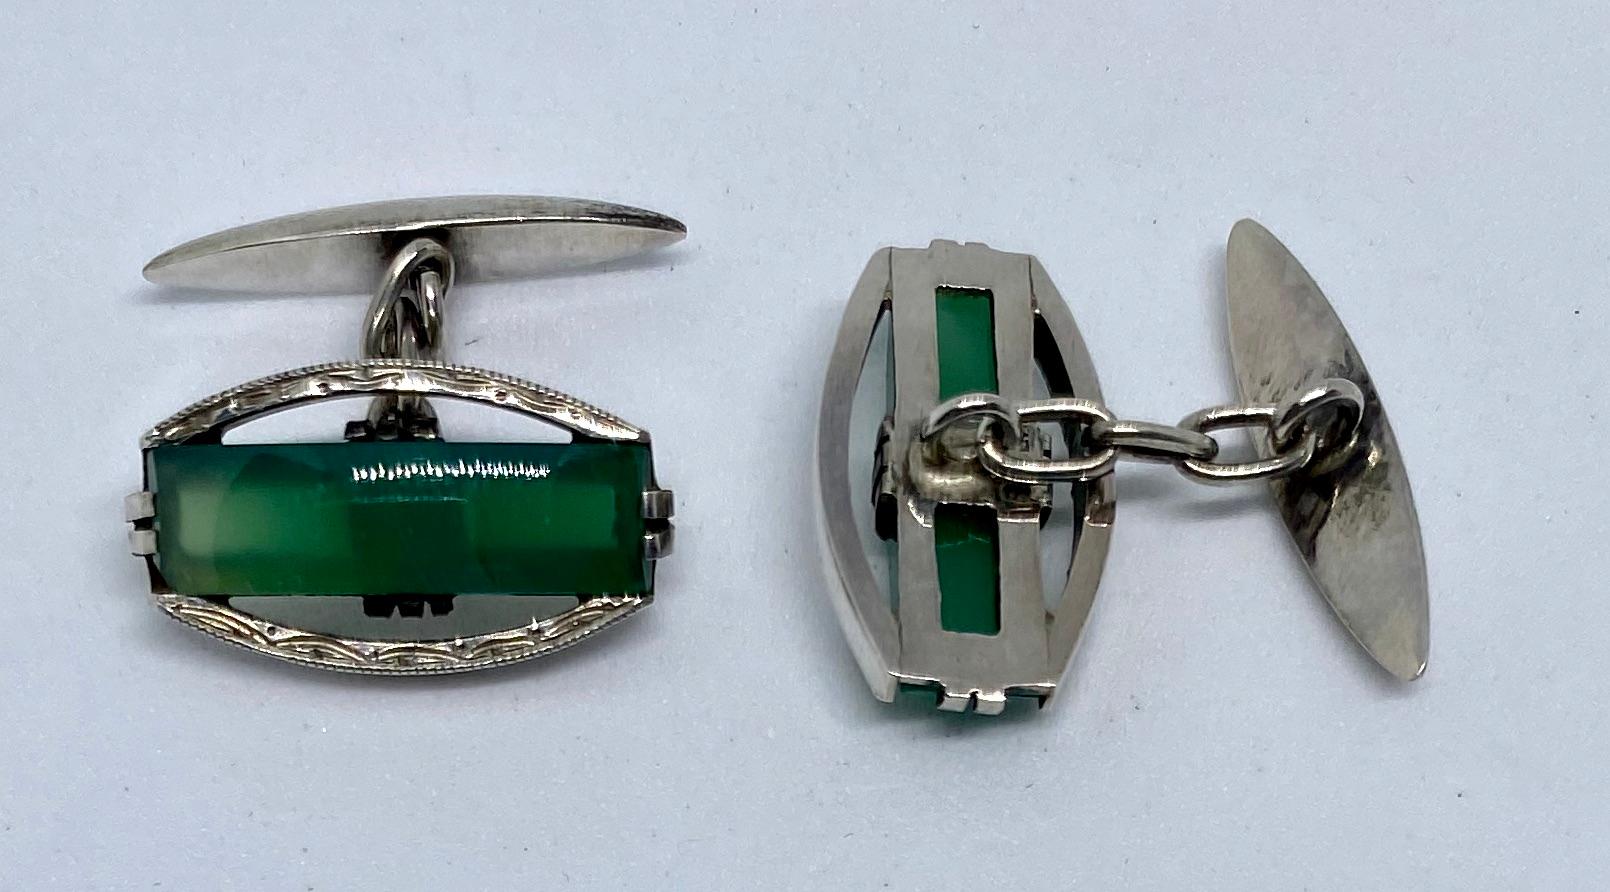 A pair of antique Art Deco cufflinks in sterling silver featuring bright green chrysoprase stones.

The tonneau-shaped cufflinks show exemplary Art Deco lines and details, along with a wonderful pop of color from the luminous green chrysoprase.